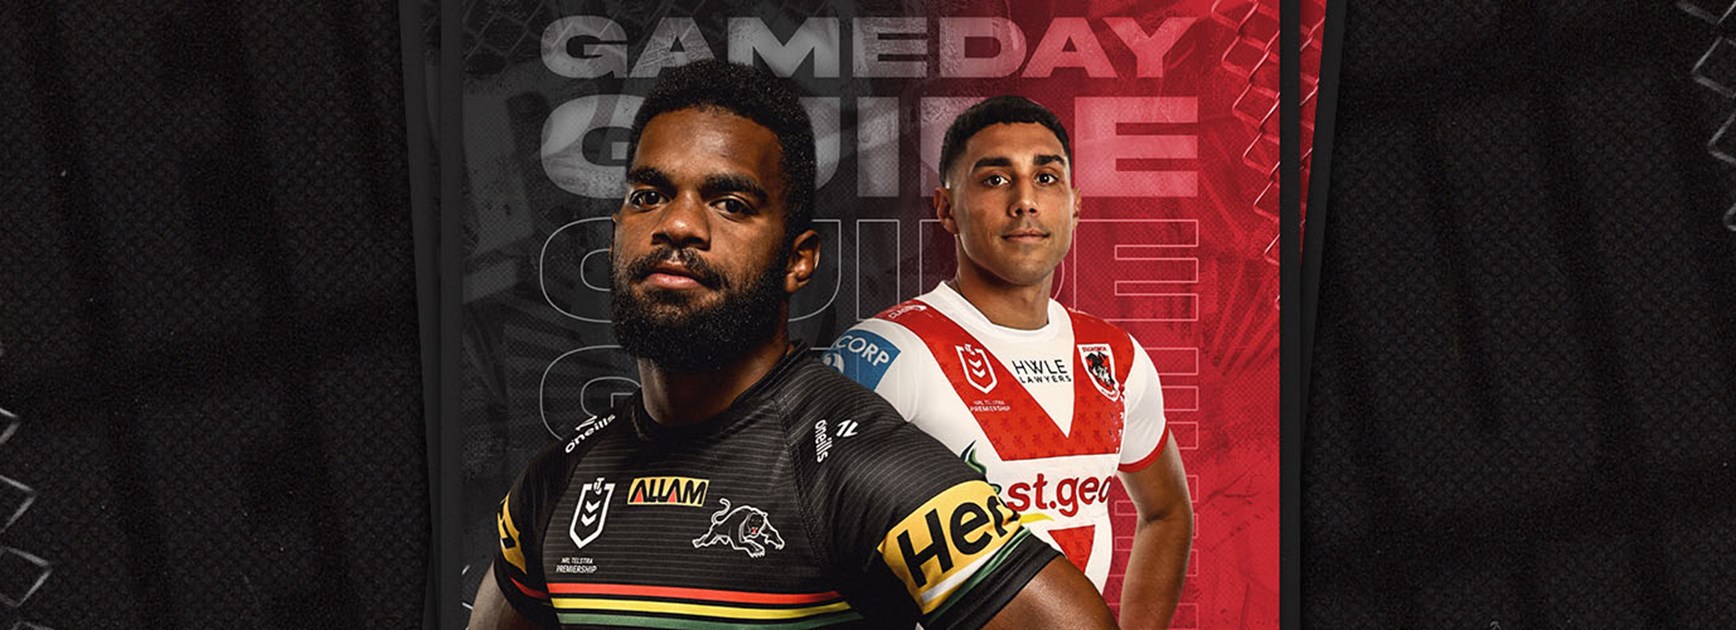 Gameday Guide: Panthers v Dragons